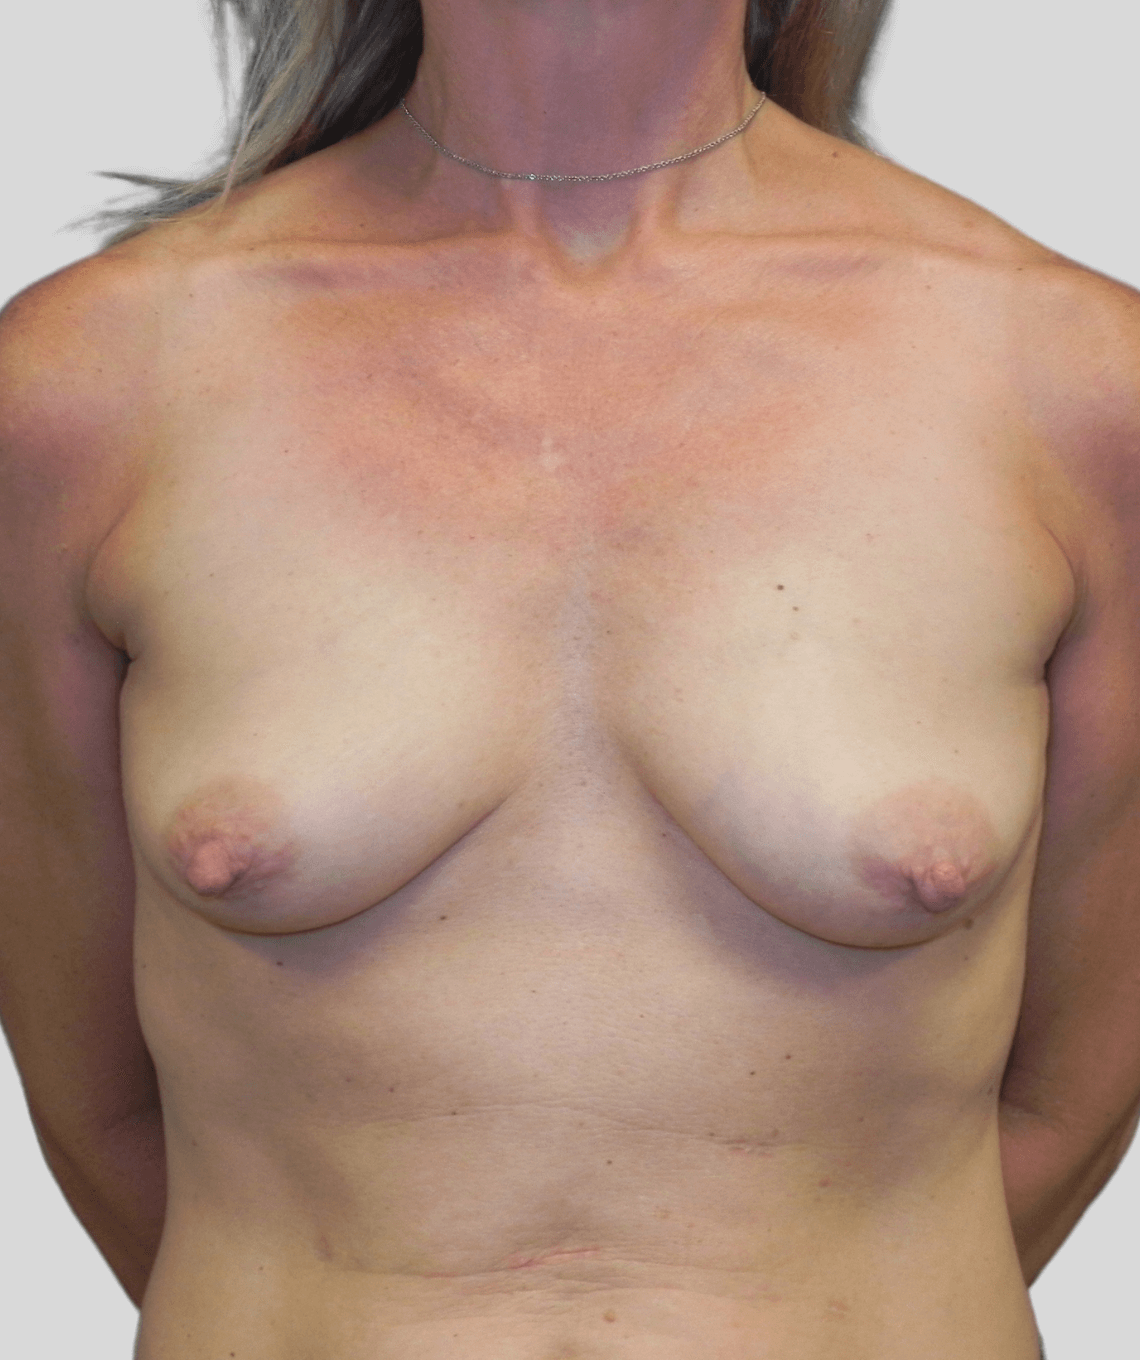 nipple sparing mastectomy with direct to implant breast reconstruction - before and after photos - prma plastic surgery - case 26